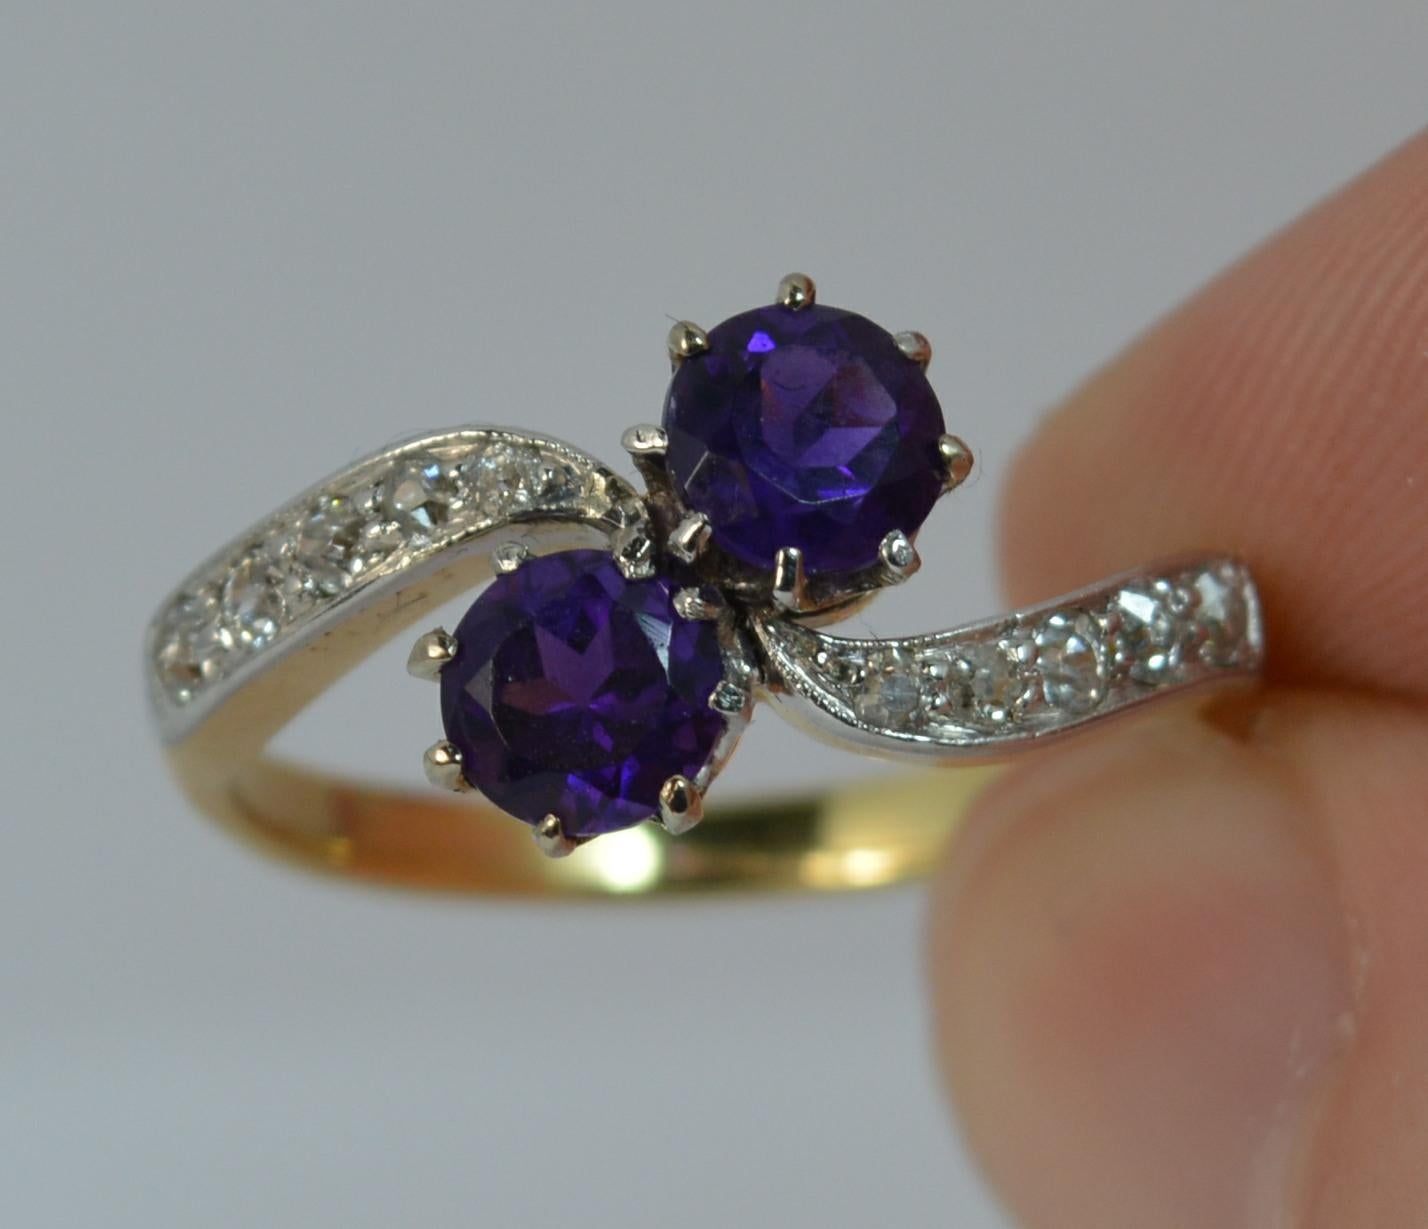 Antique 18 Carat Gold and Platinum Amethyst Toi et Moi Ring with Diamonds 1